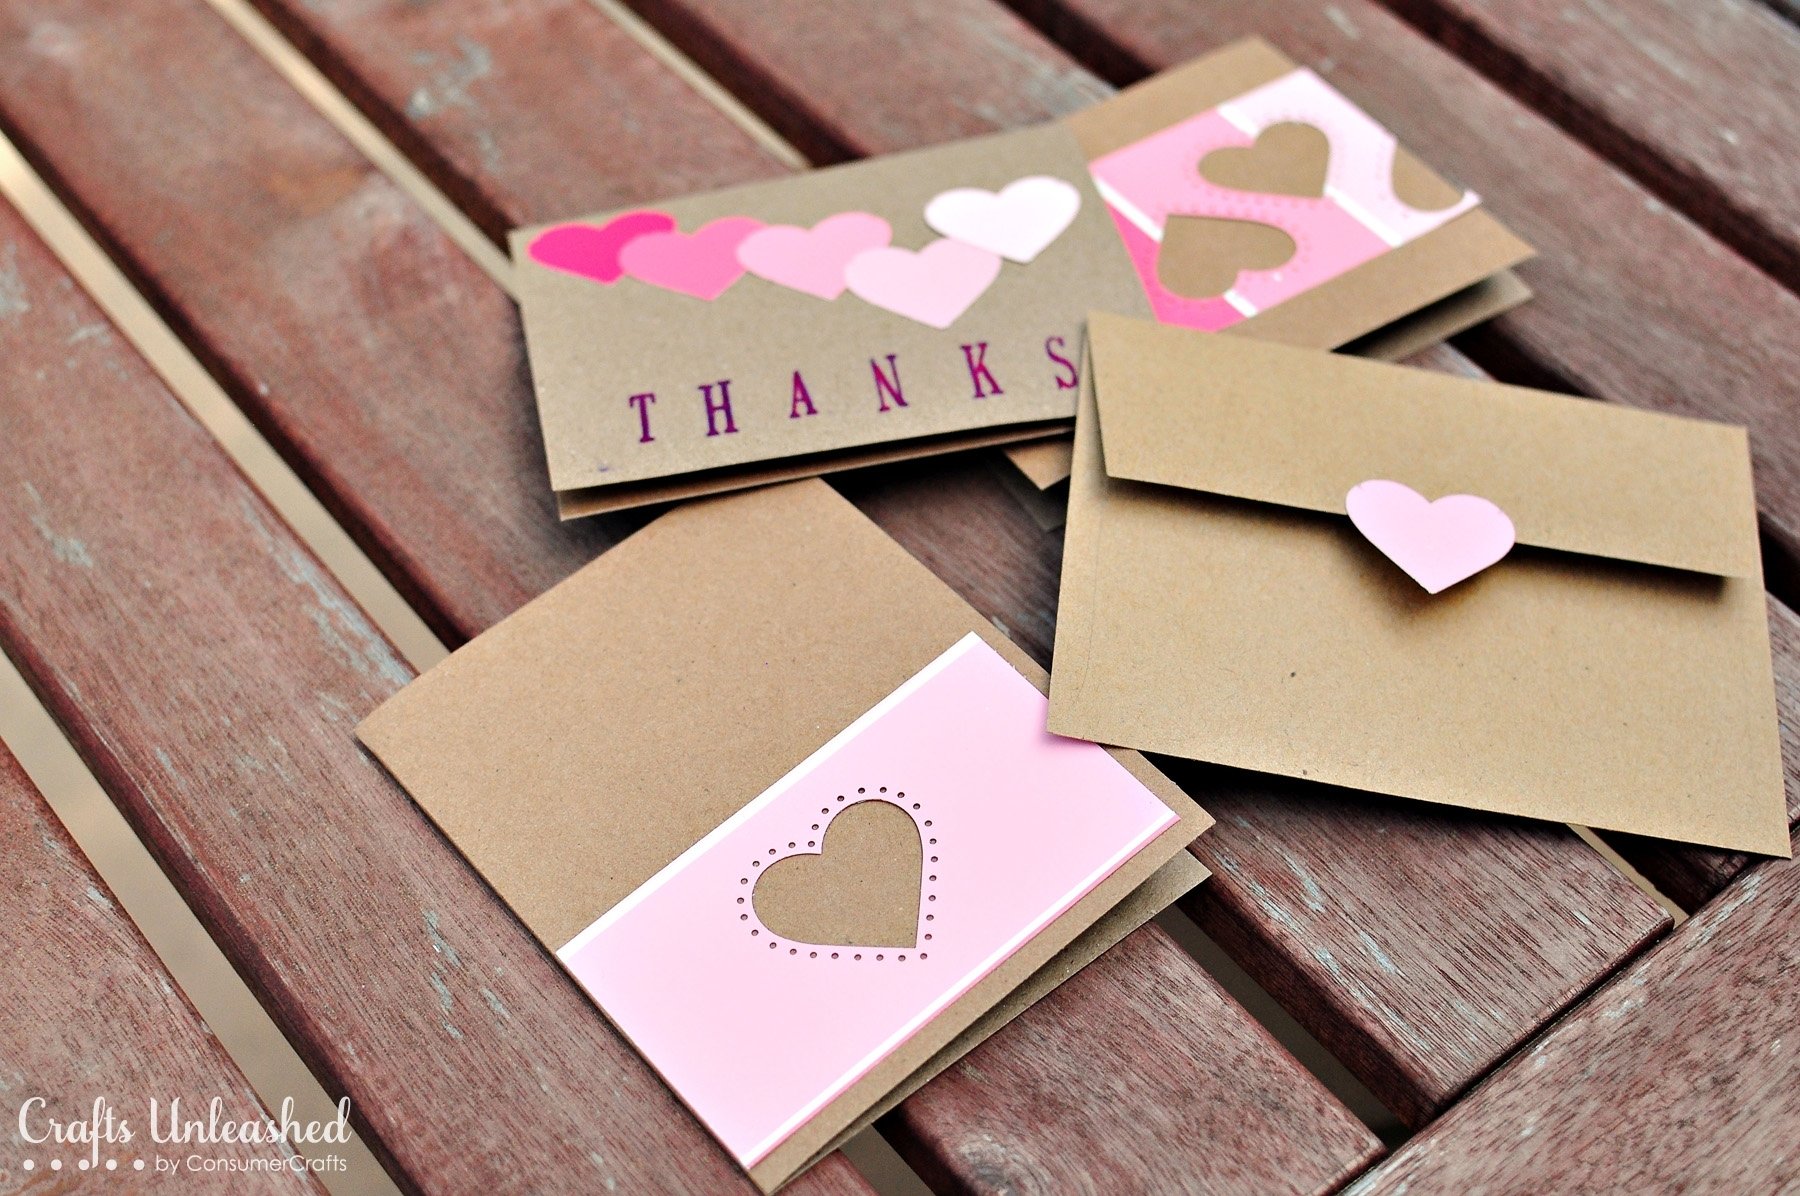 10 Attractive Handmade Thank You Cards Ideas paint chip handmade thank you cards 2022